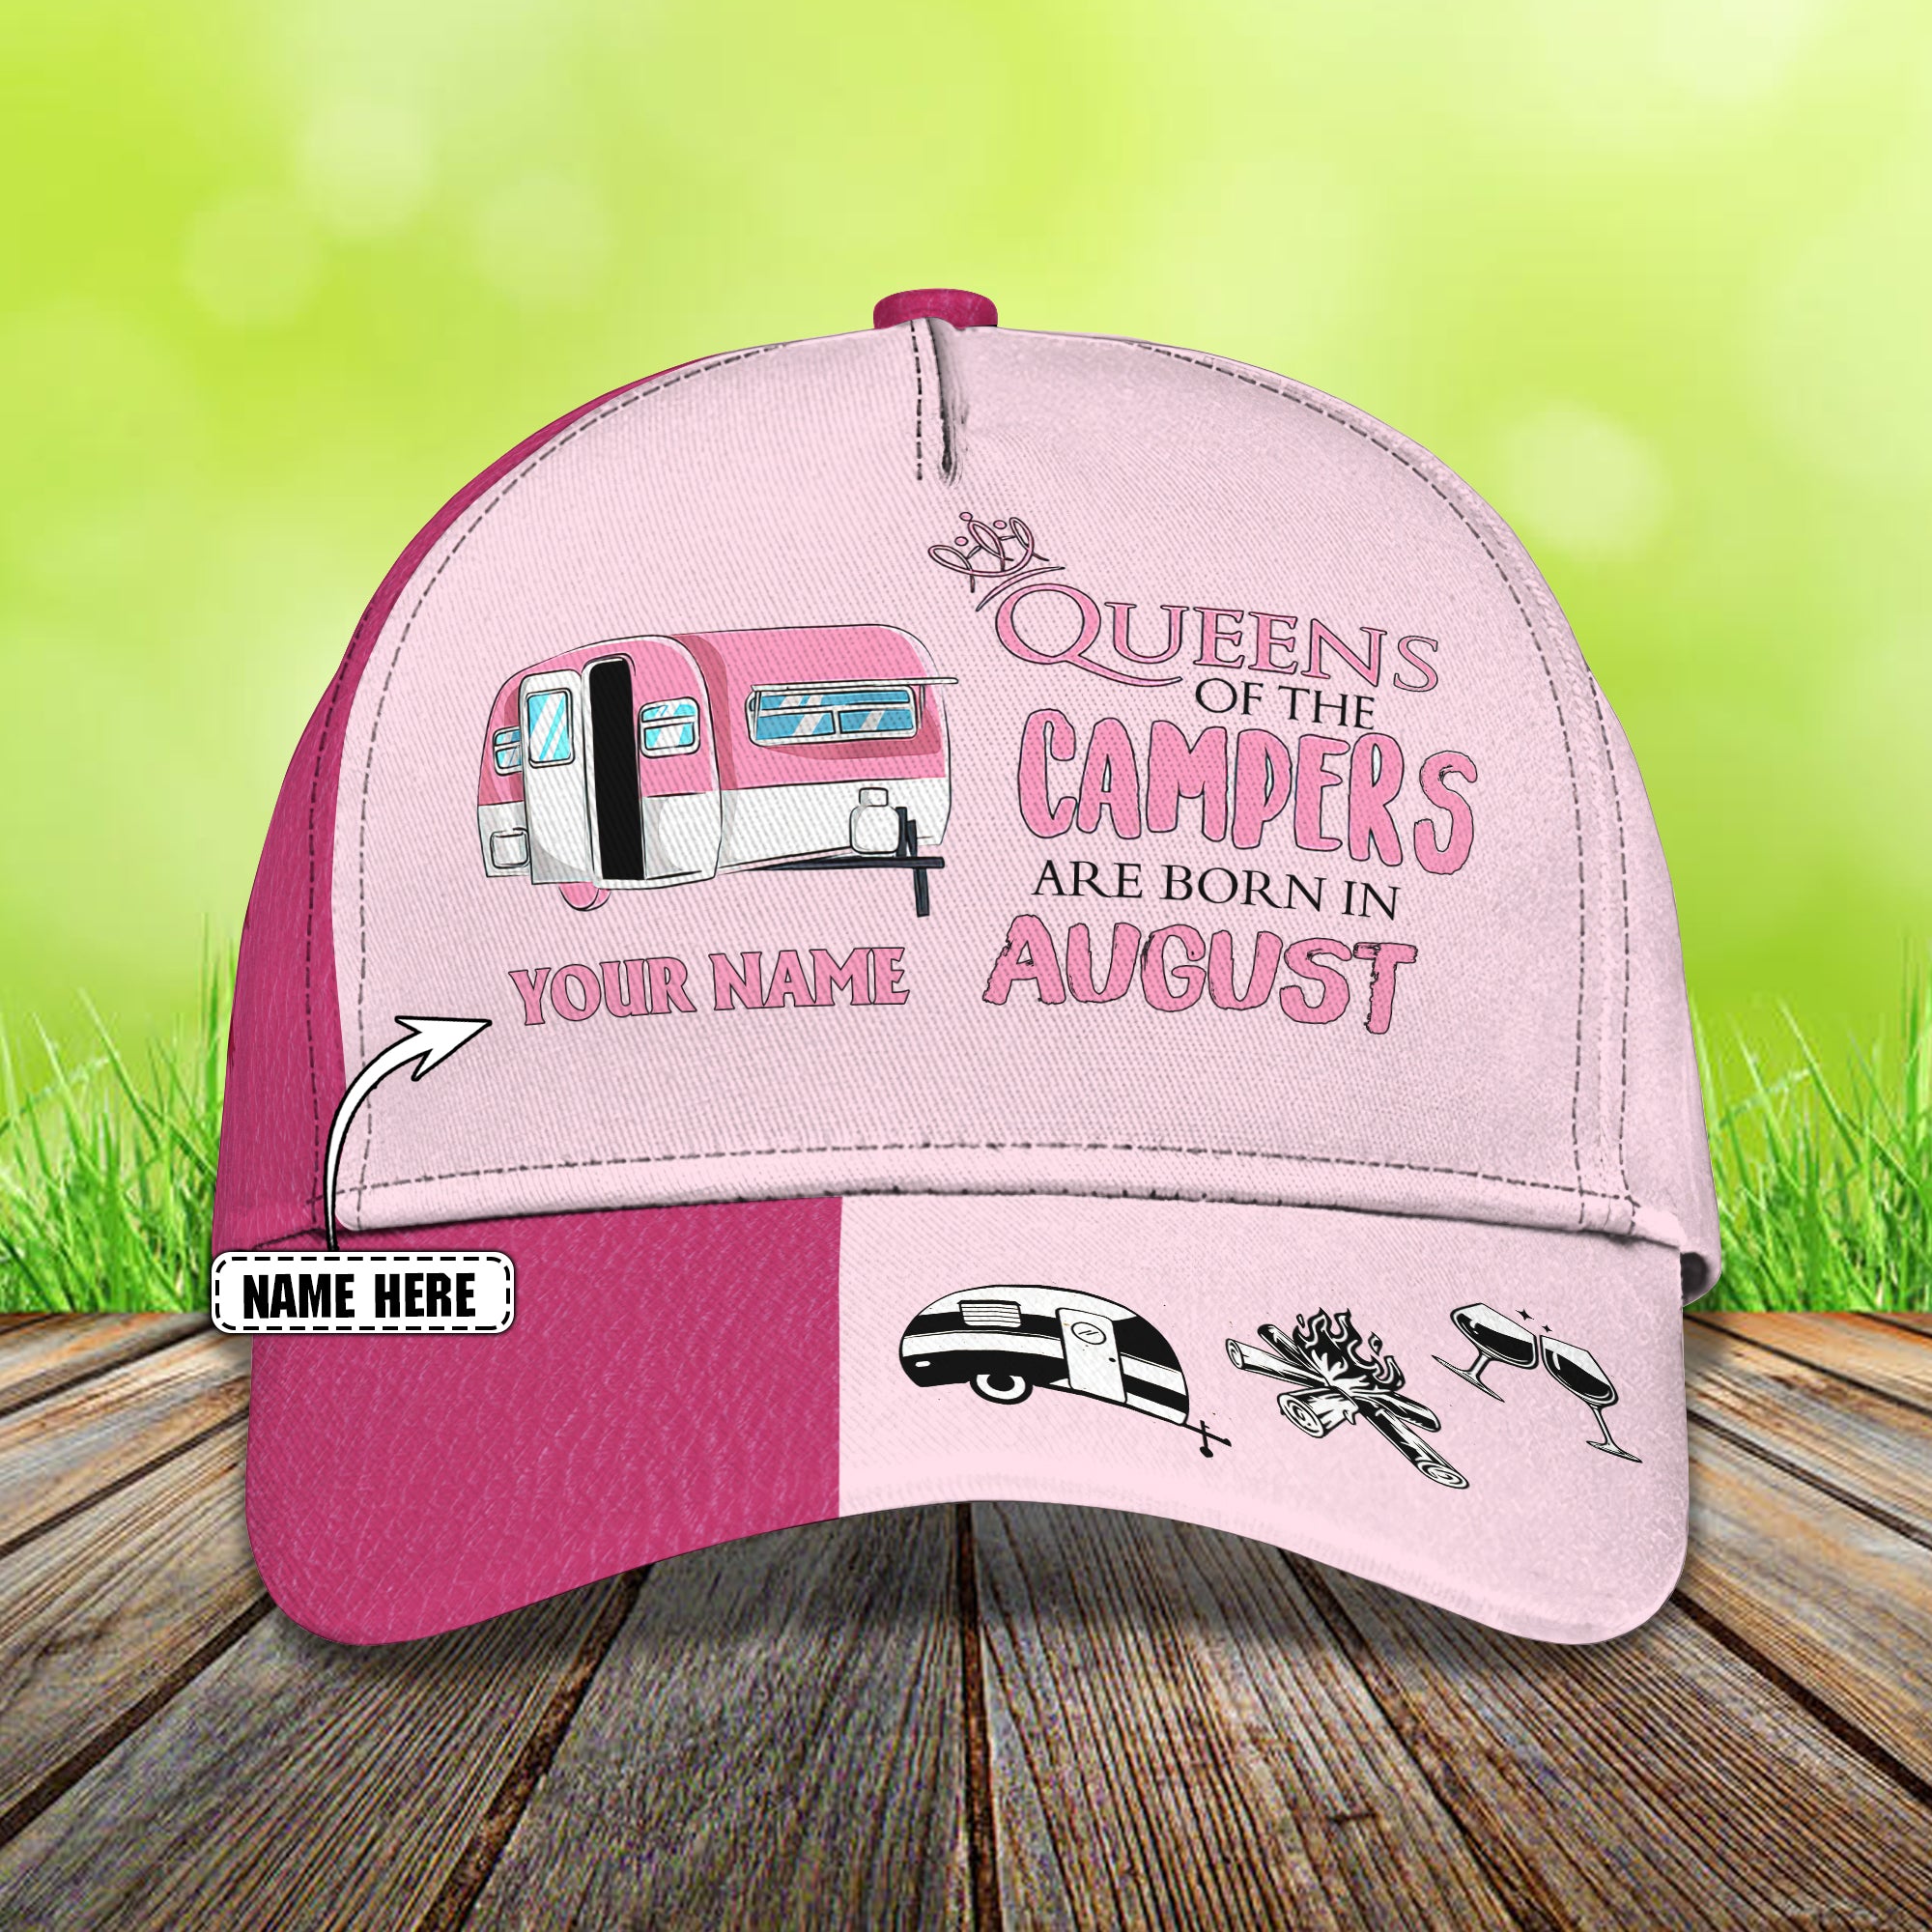 Queen Of The Campers (August)- Personalized Name Cap 15- Lta98